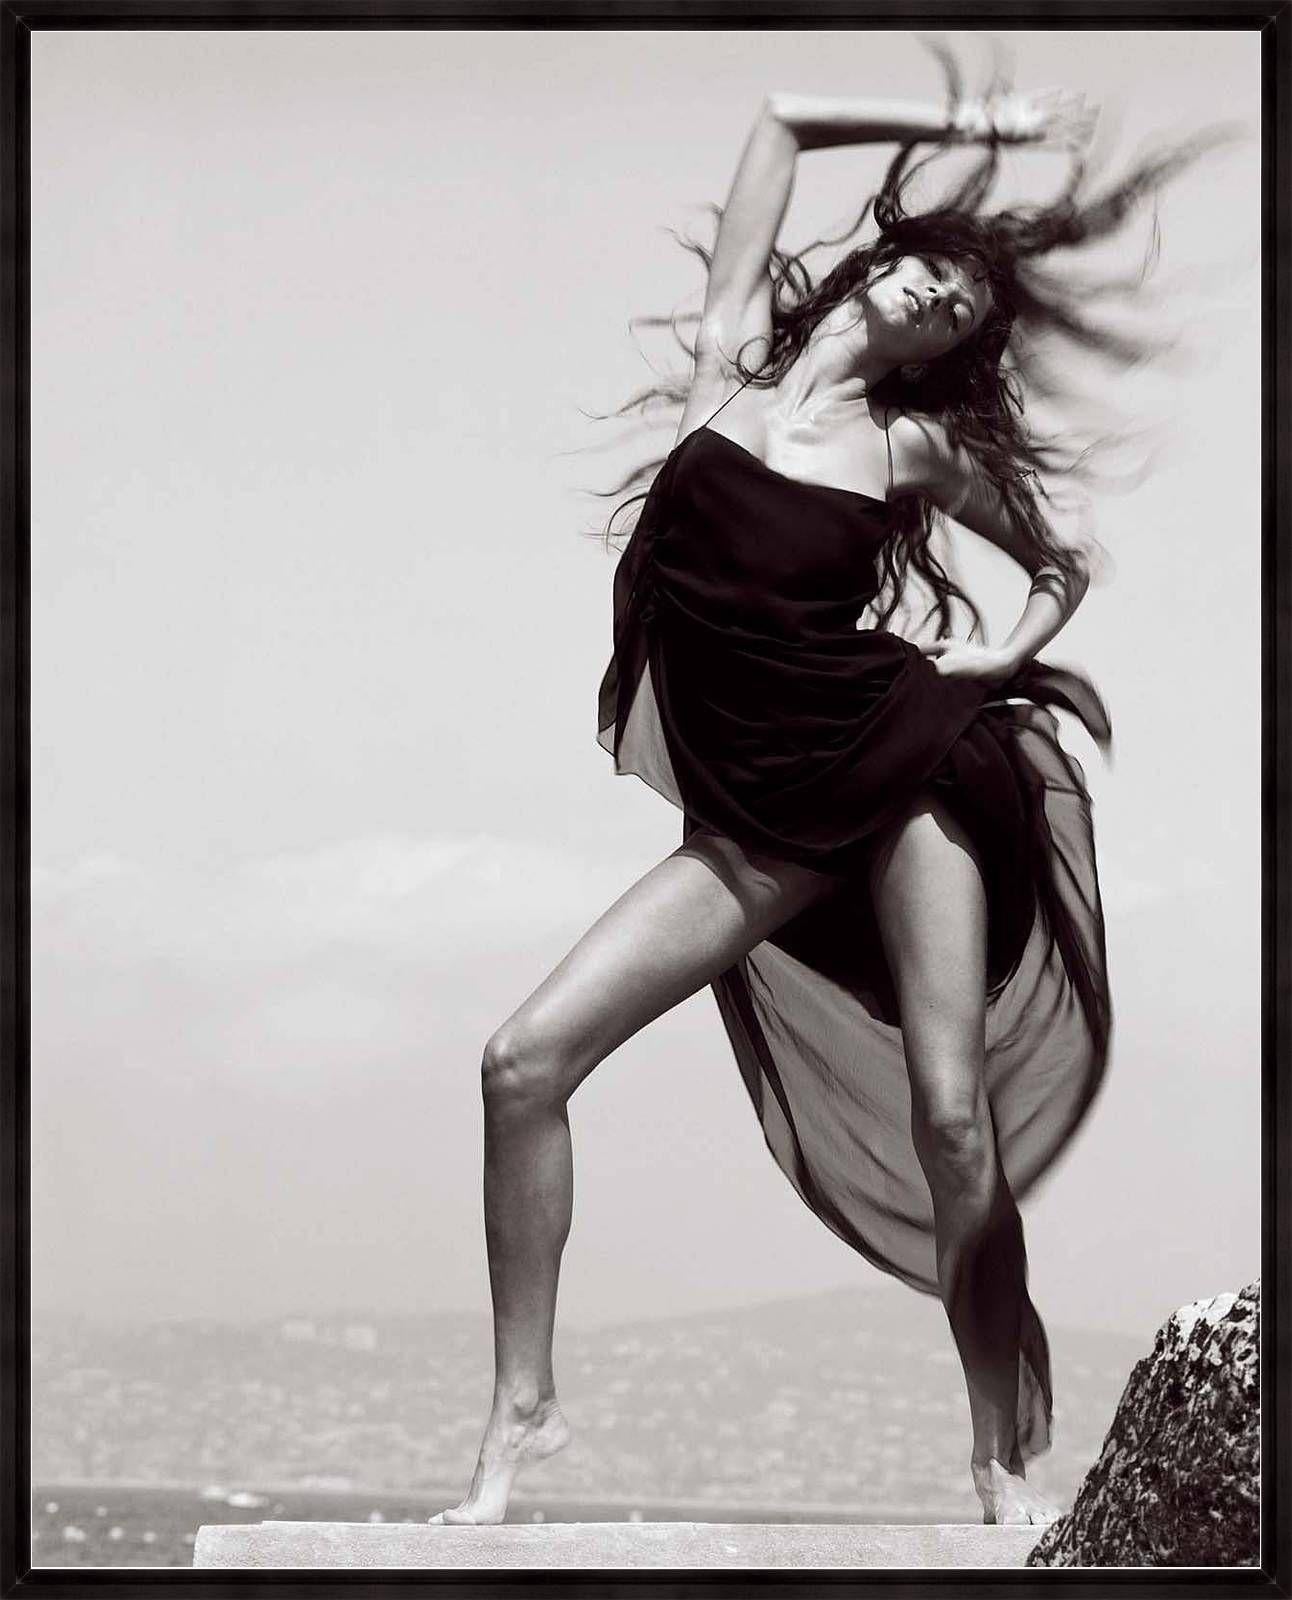 Michel Comte Portrait Photograph - Gisele Buendchen - the naked supermodel in a black dress, wind blowing in Cannes